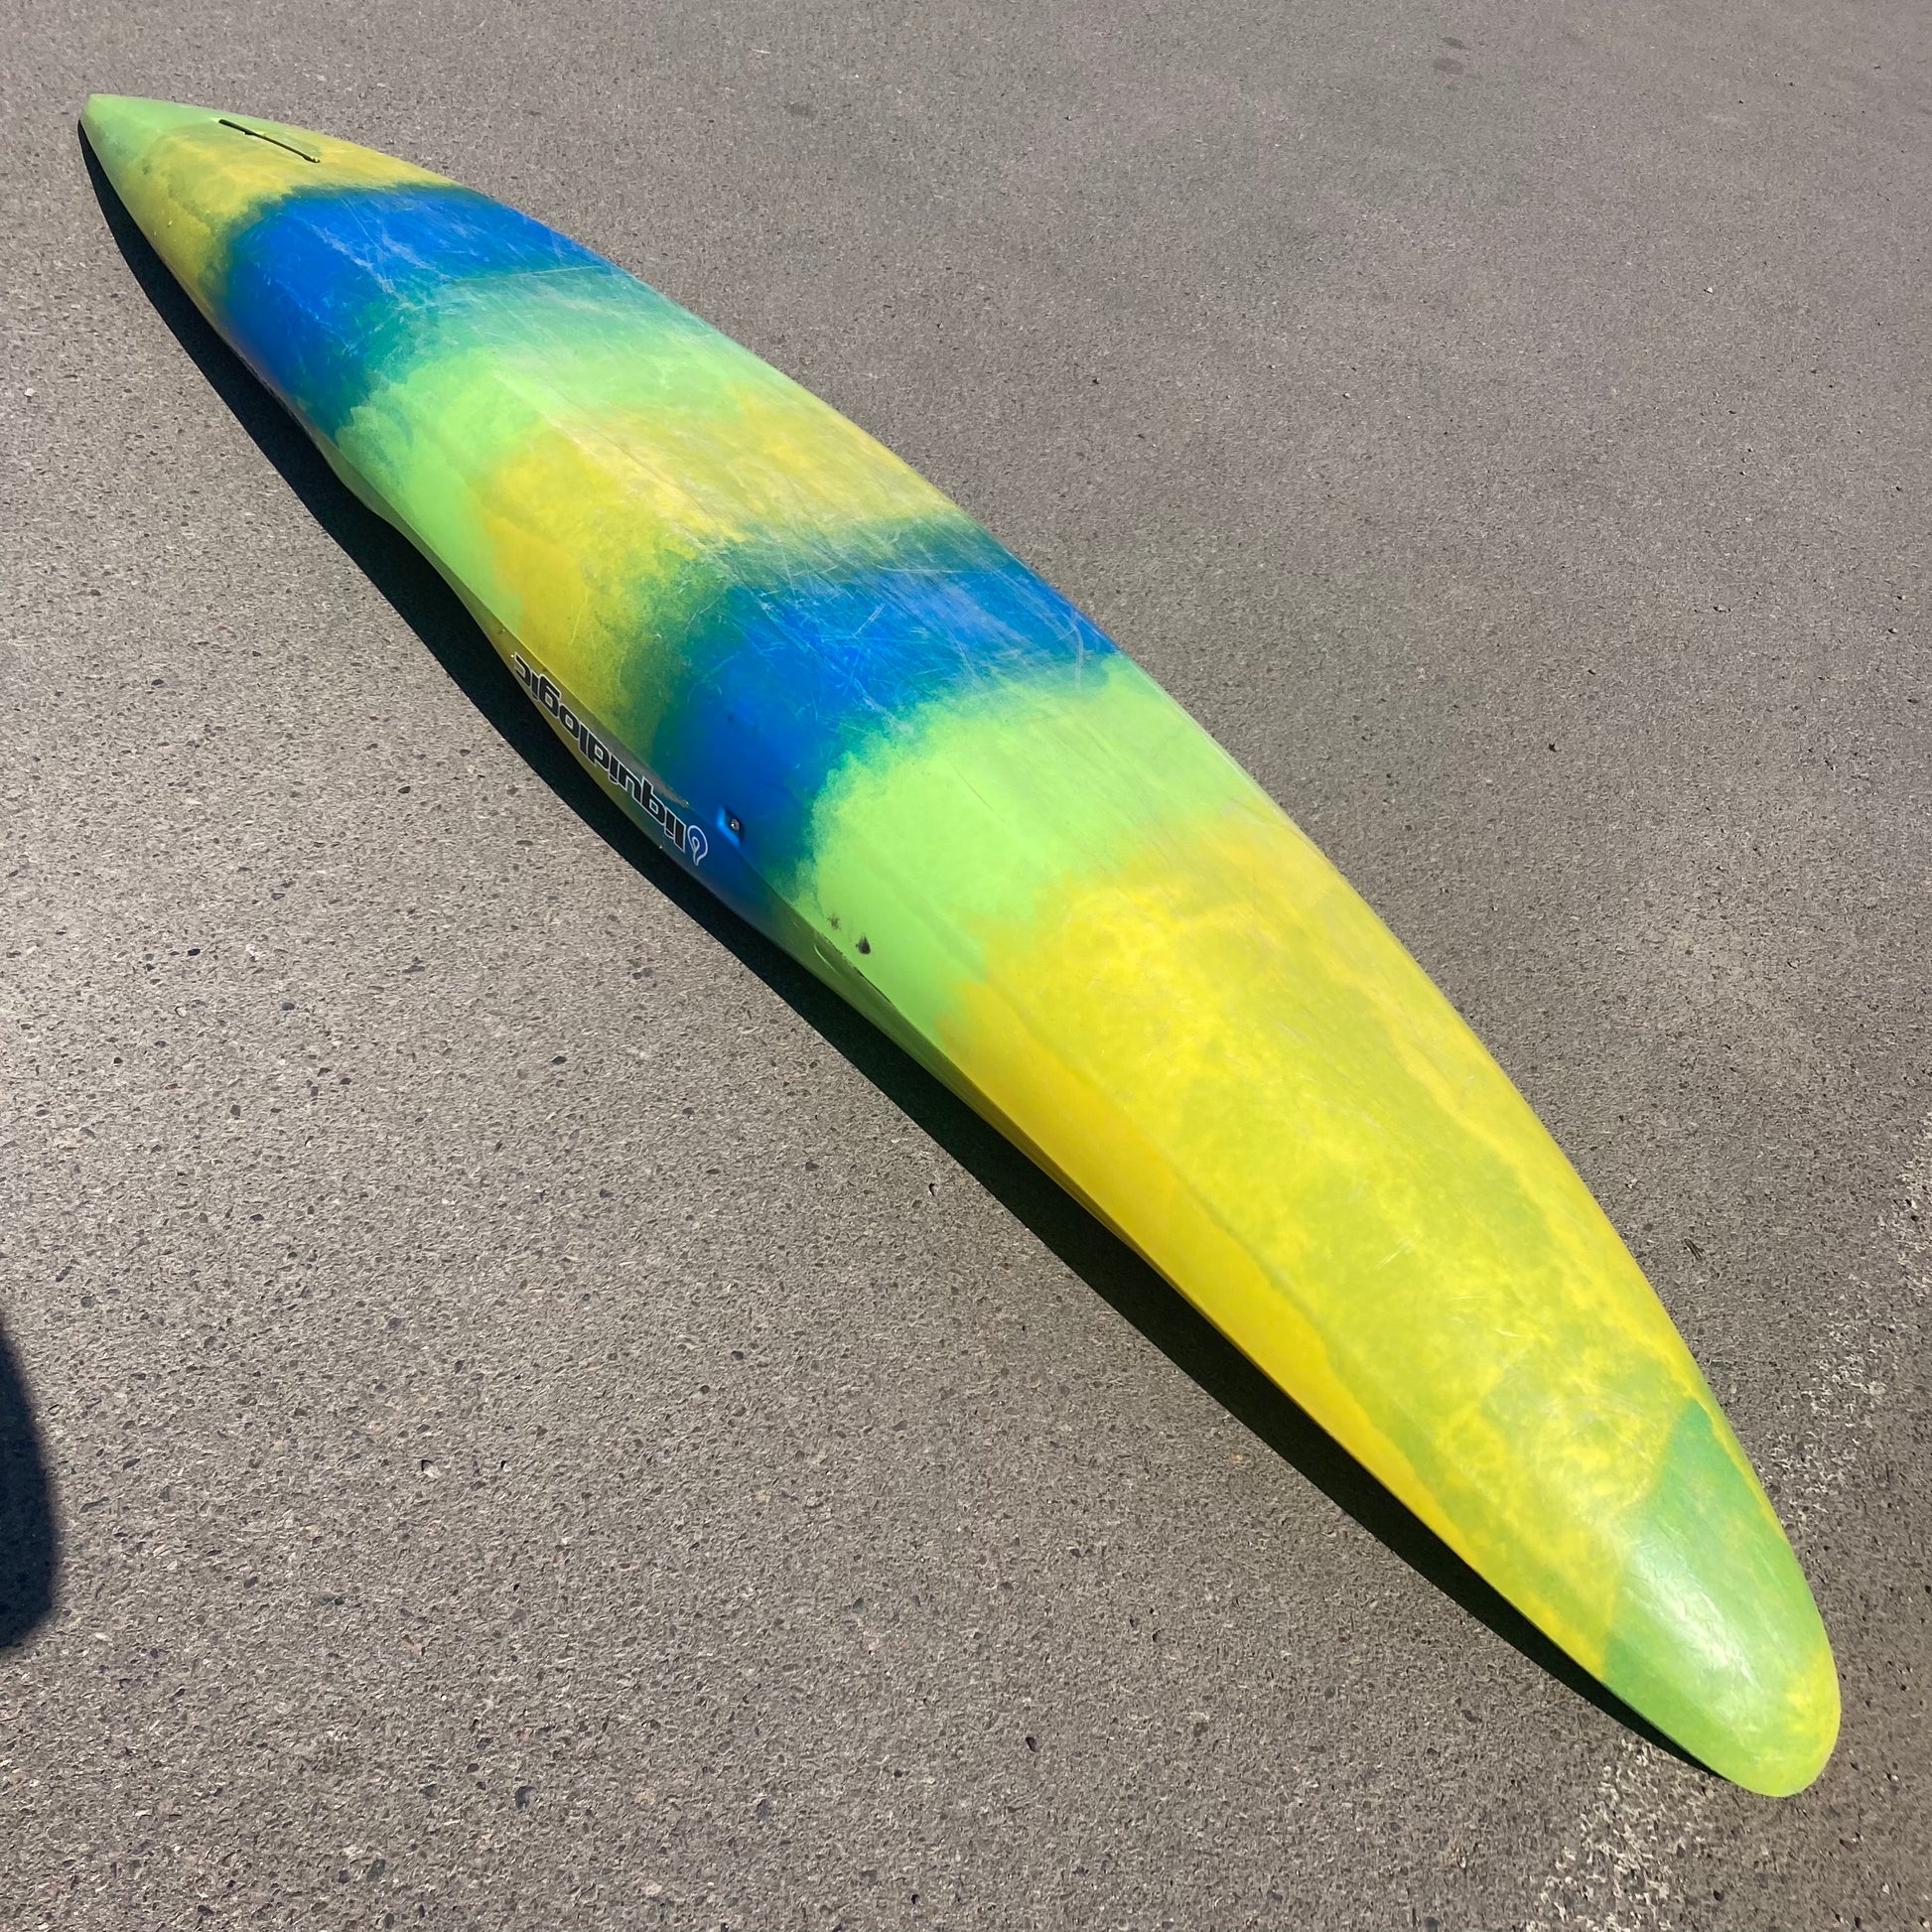 A yellow and blue Demo Stinger XP surfboard laying on the ground. (Brand: LiquidLogic)